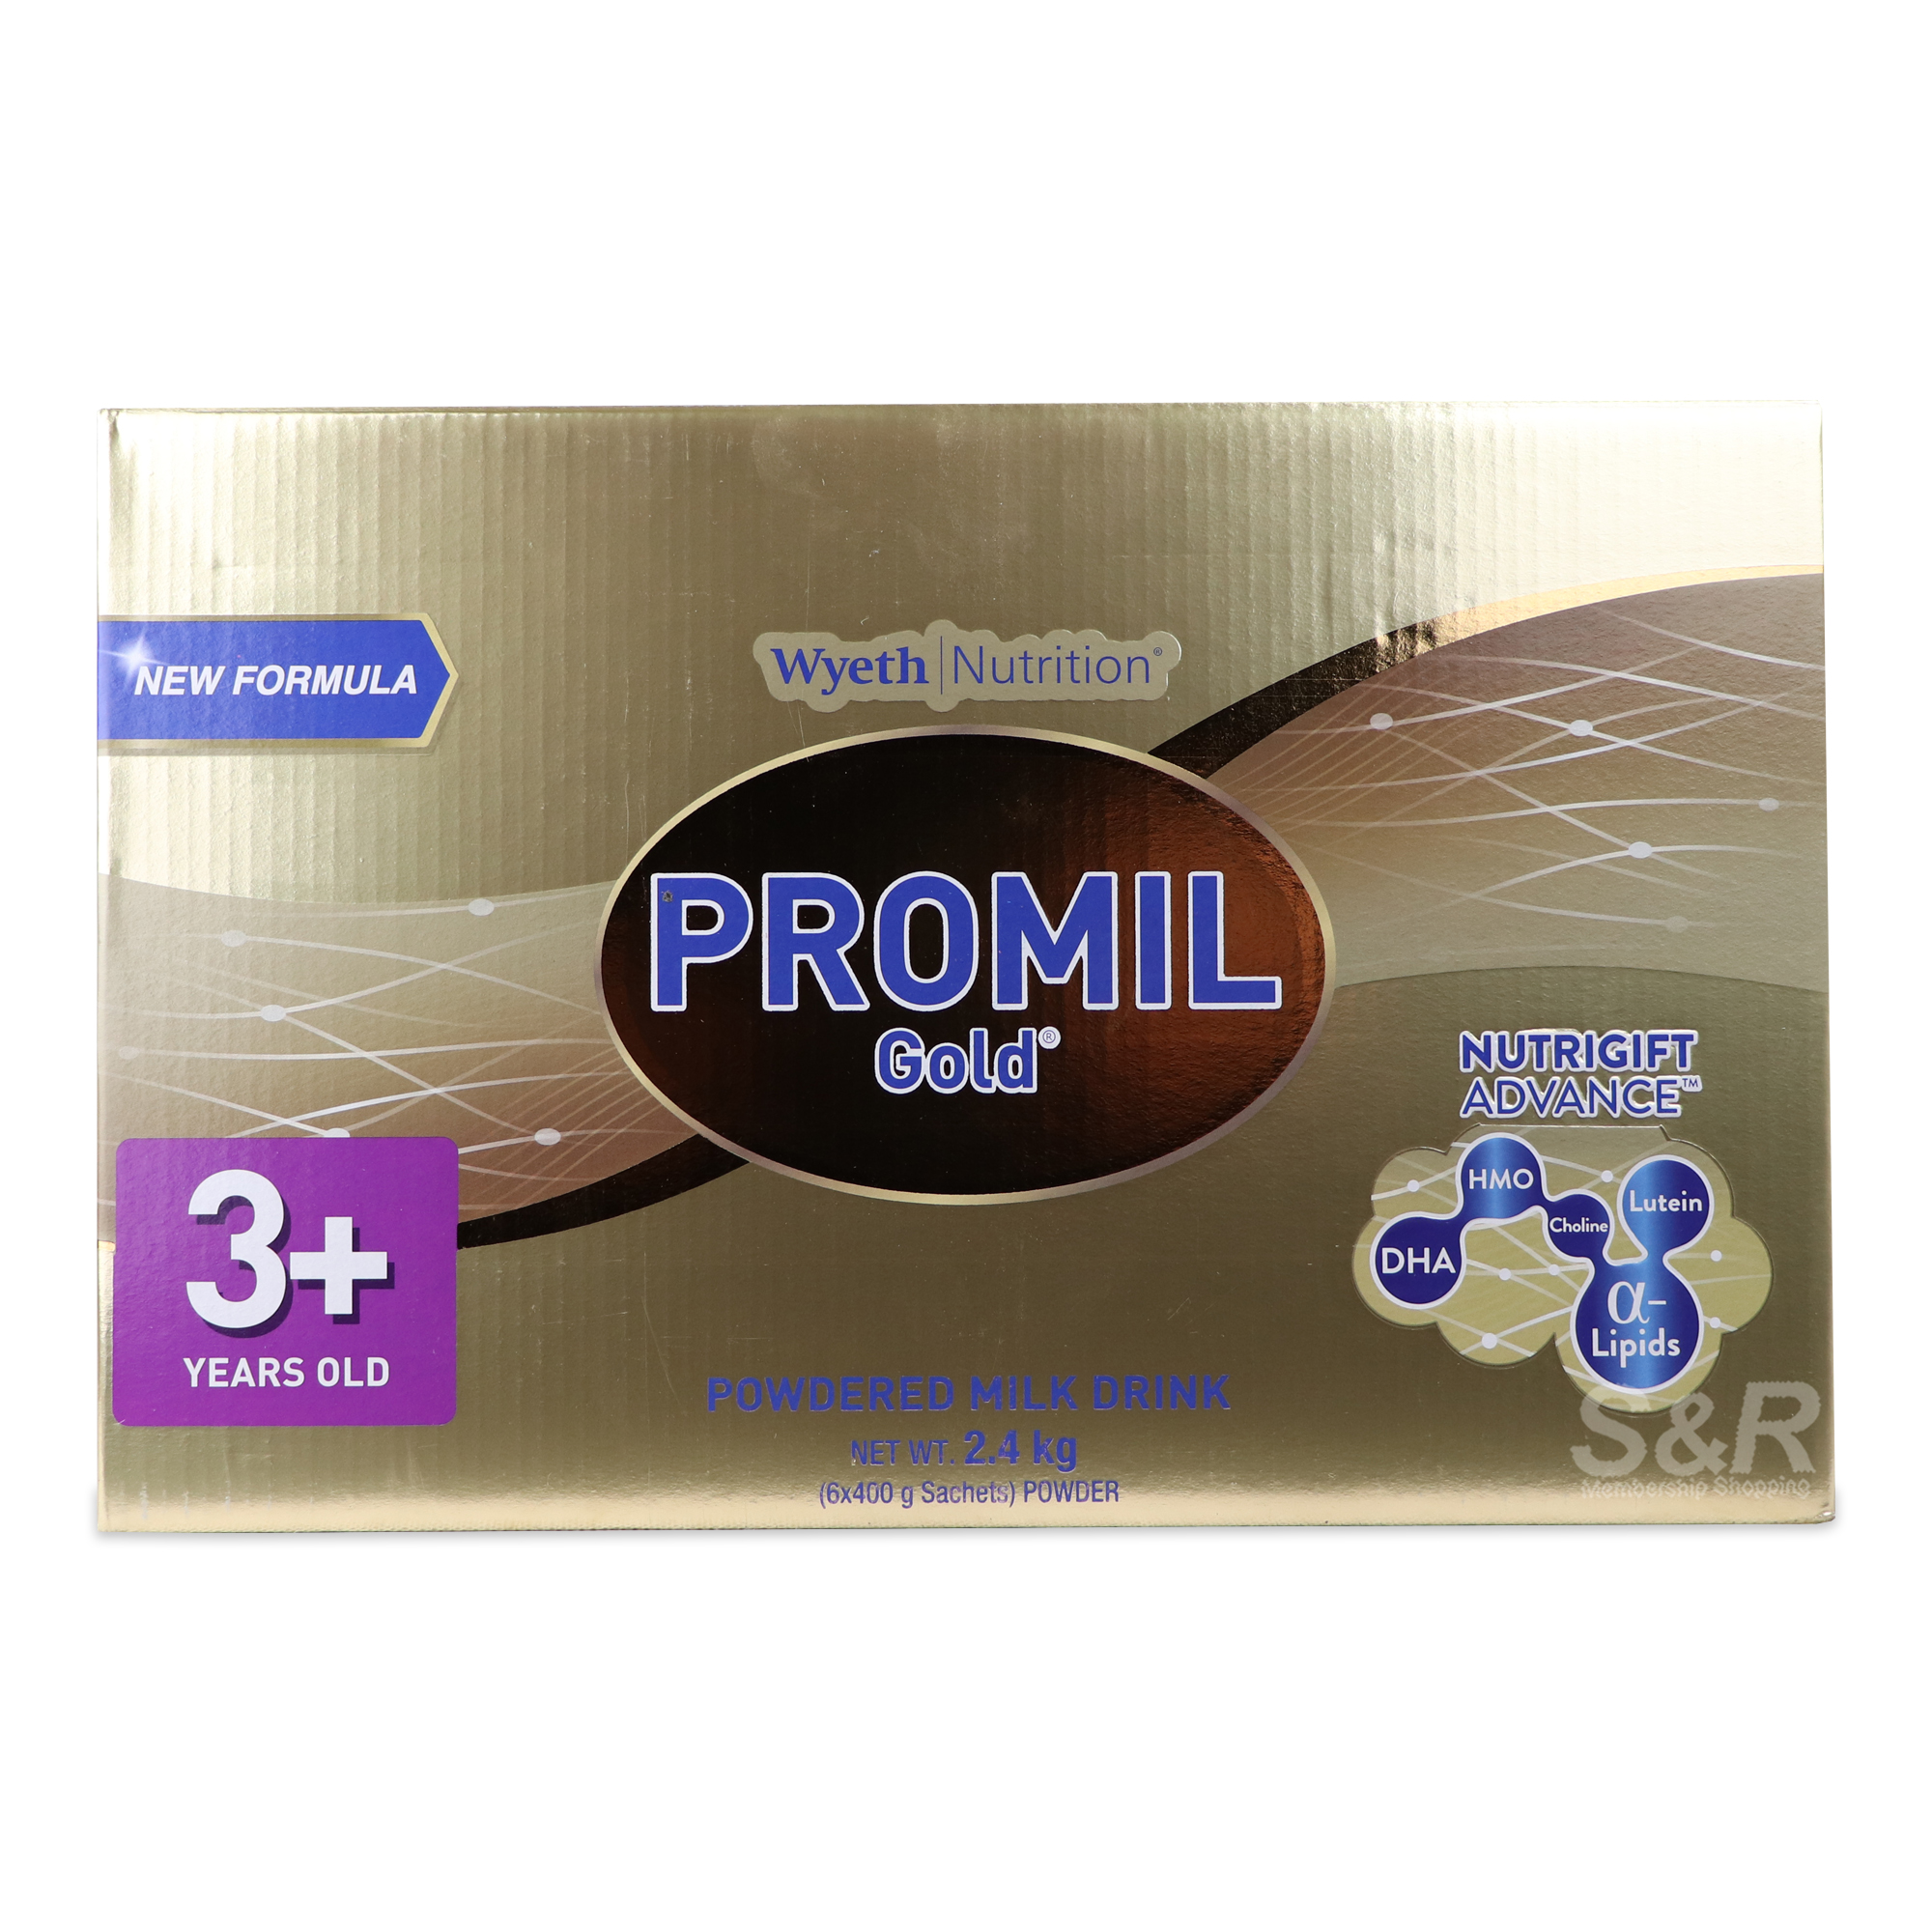 Wyeth Nutrition Promil Gold for 3+ Years Old 2.4kg